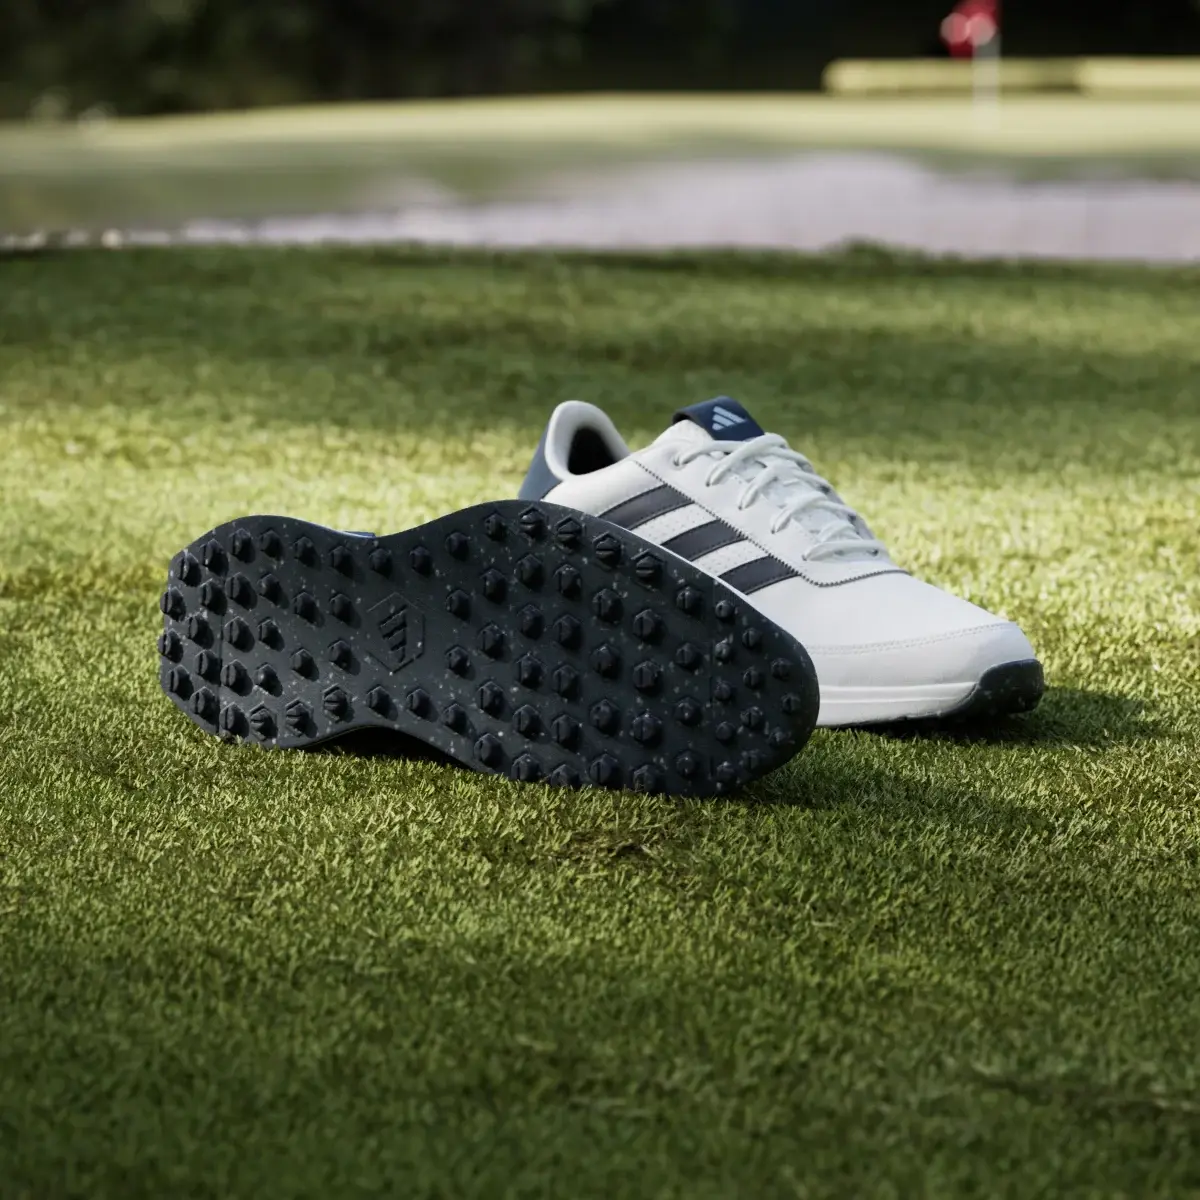 Adidas S2G Spikeless Leather 24 Golf Shoes. 3